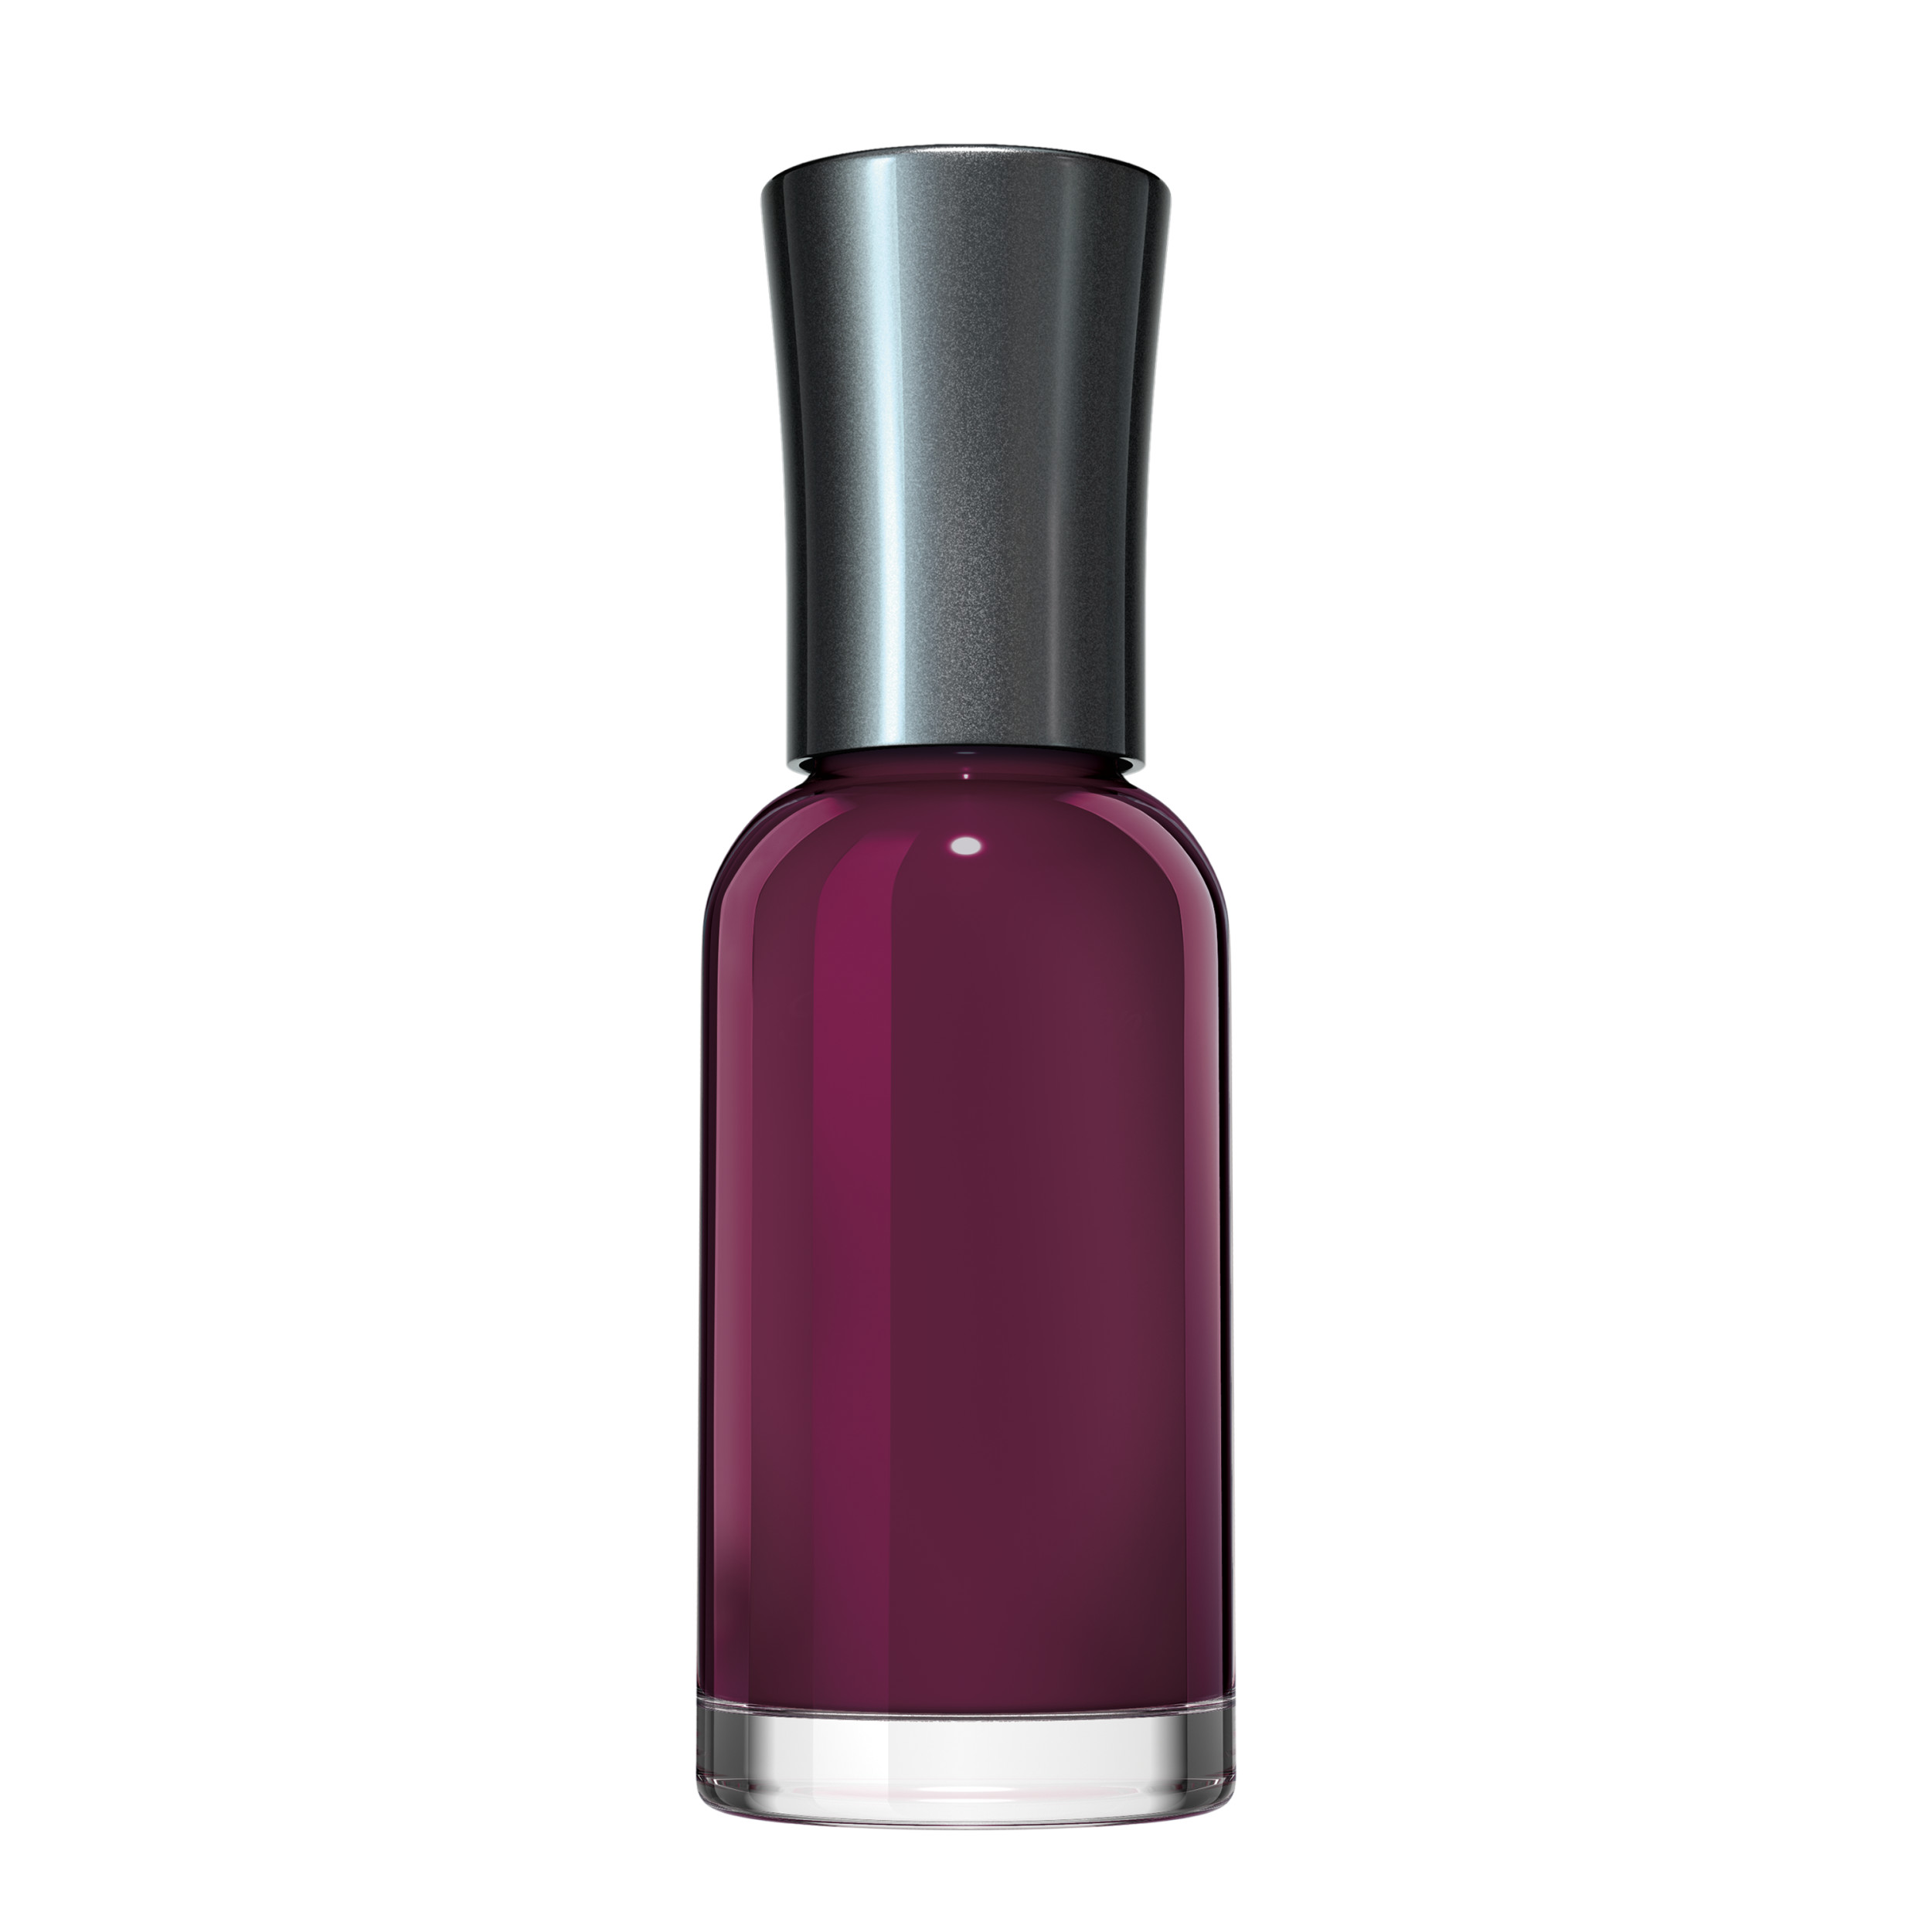 Sally Hansen Xtreme Wear Nail Polish, With The Beet, 0.4 oz, Chip Resistant, Bold Color - image 10 of 10